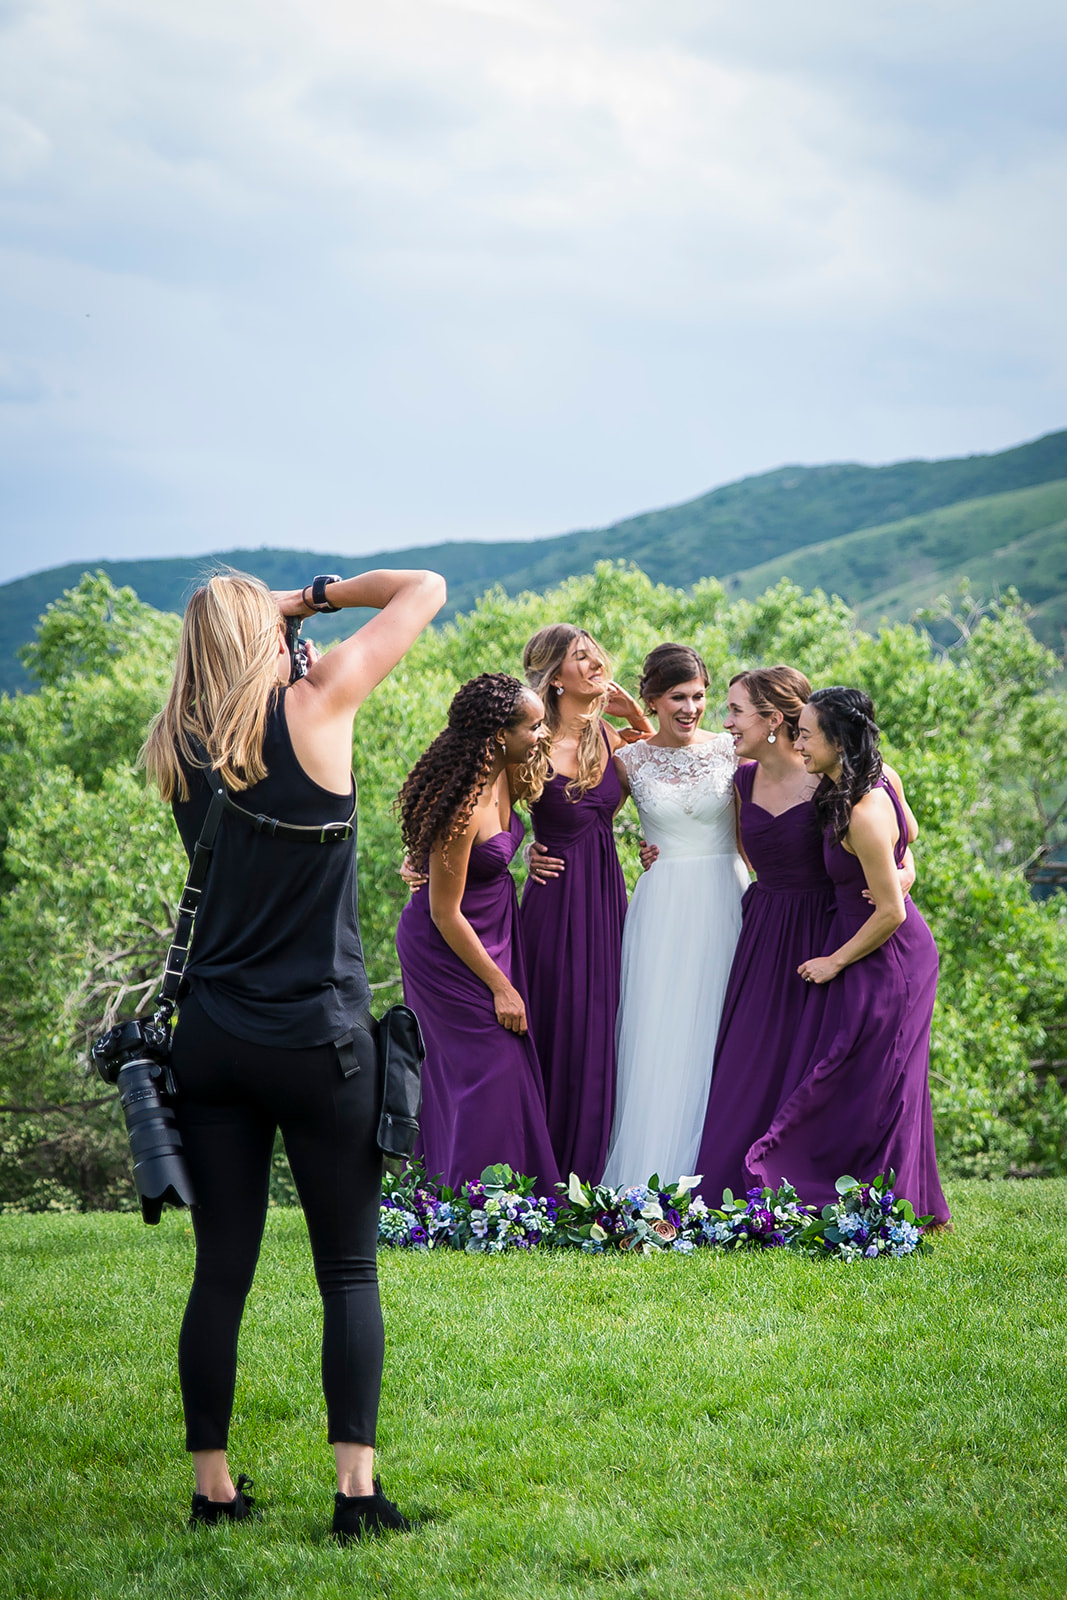 Wedding photographer captures group of bridesmaids and bride posing for photo in green, grassy field.